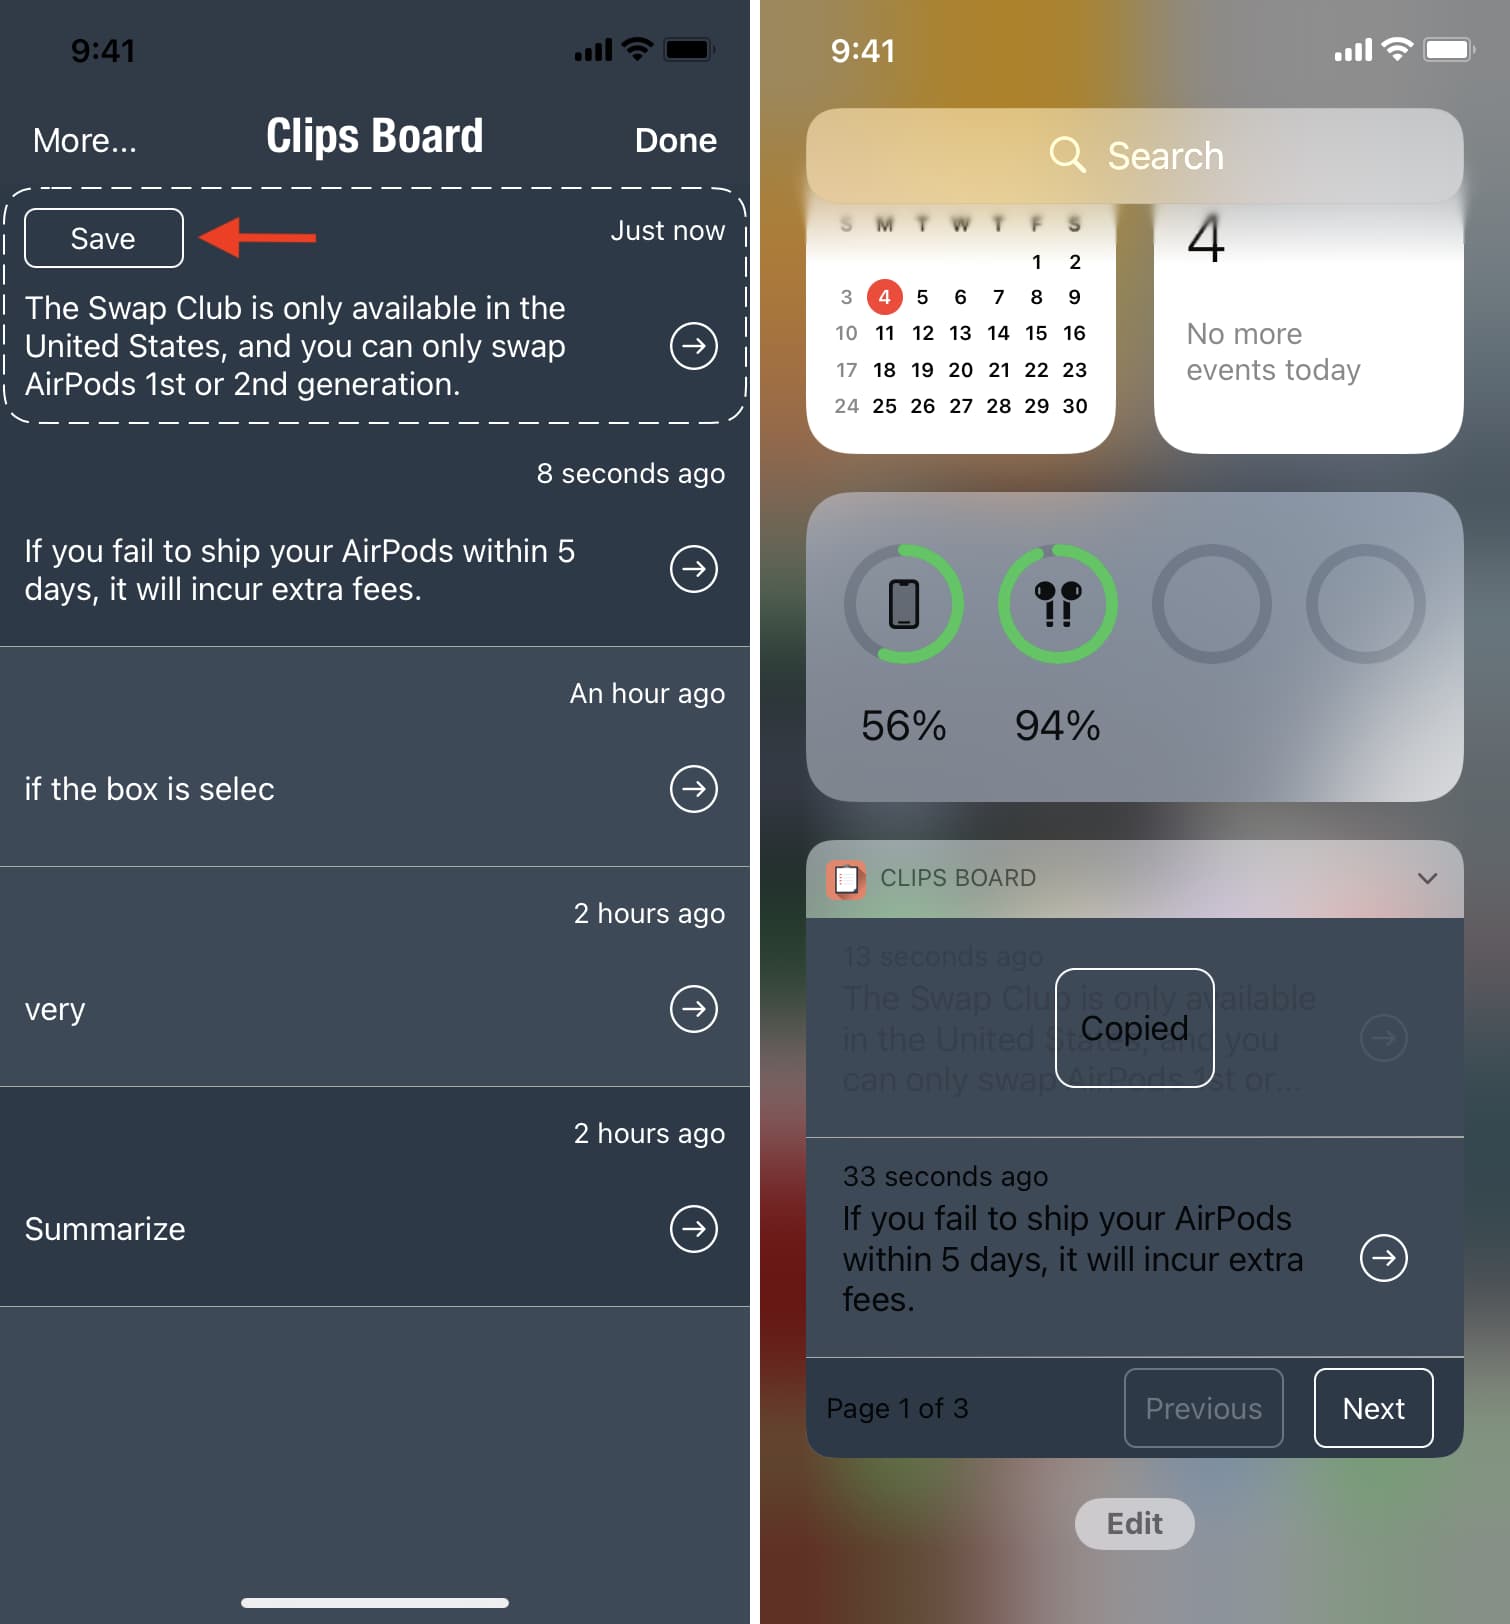 Clips Board clipboard app on iPhone with widget